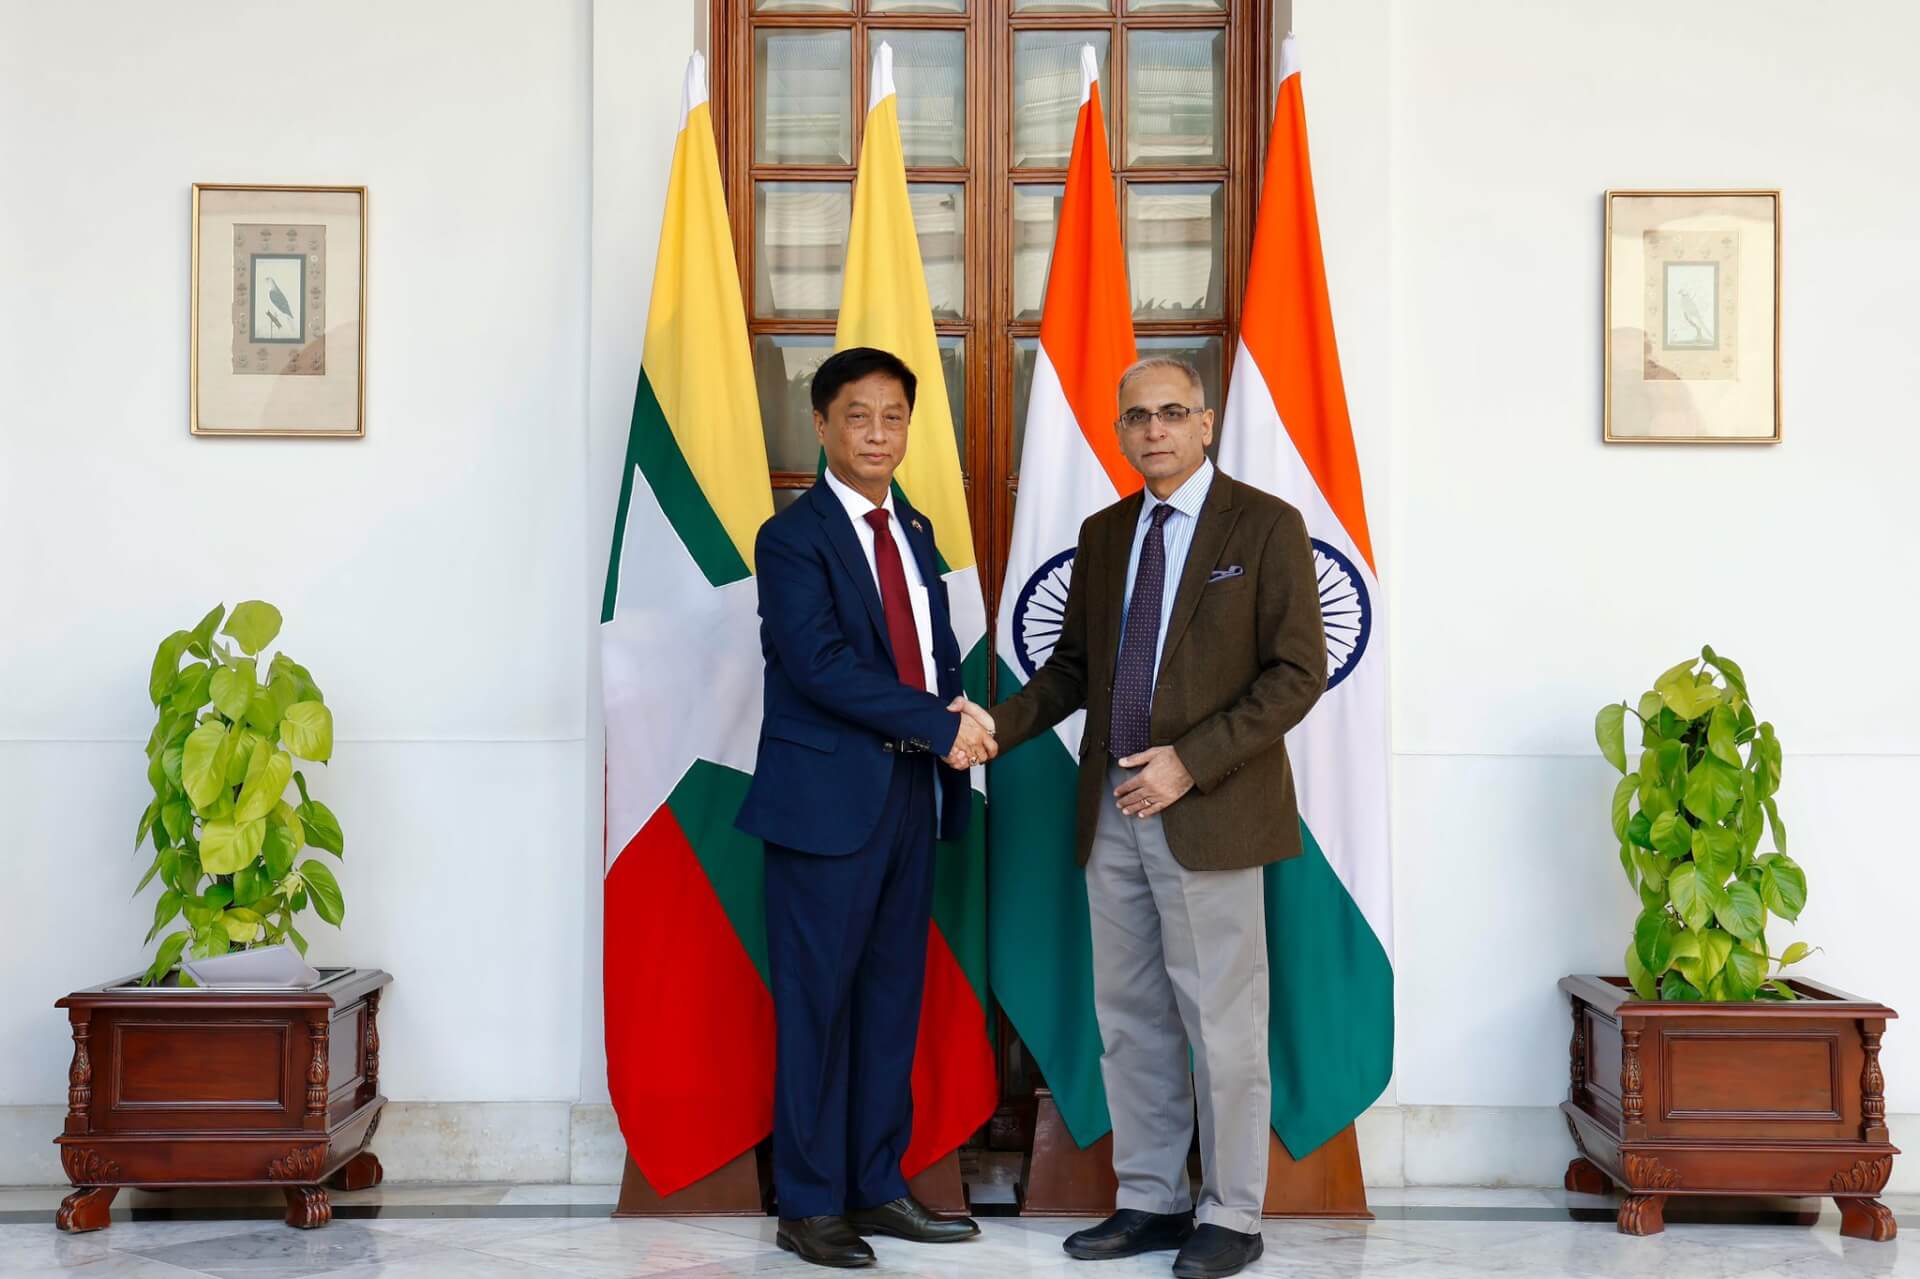 India Discusses Border Situation with Myanmar, Reiterates Support for Transition to Democracy